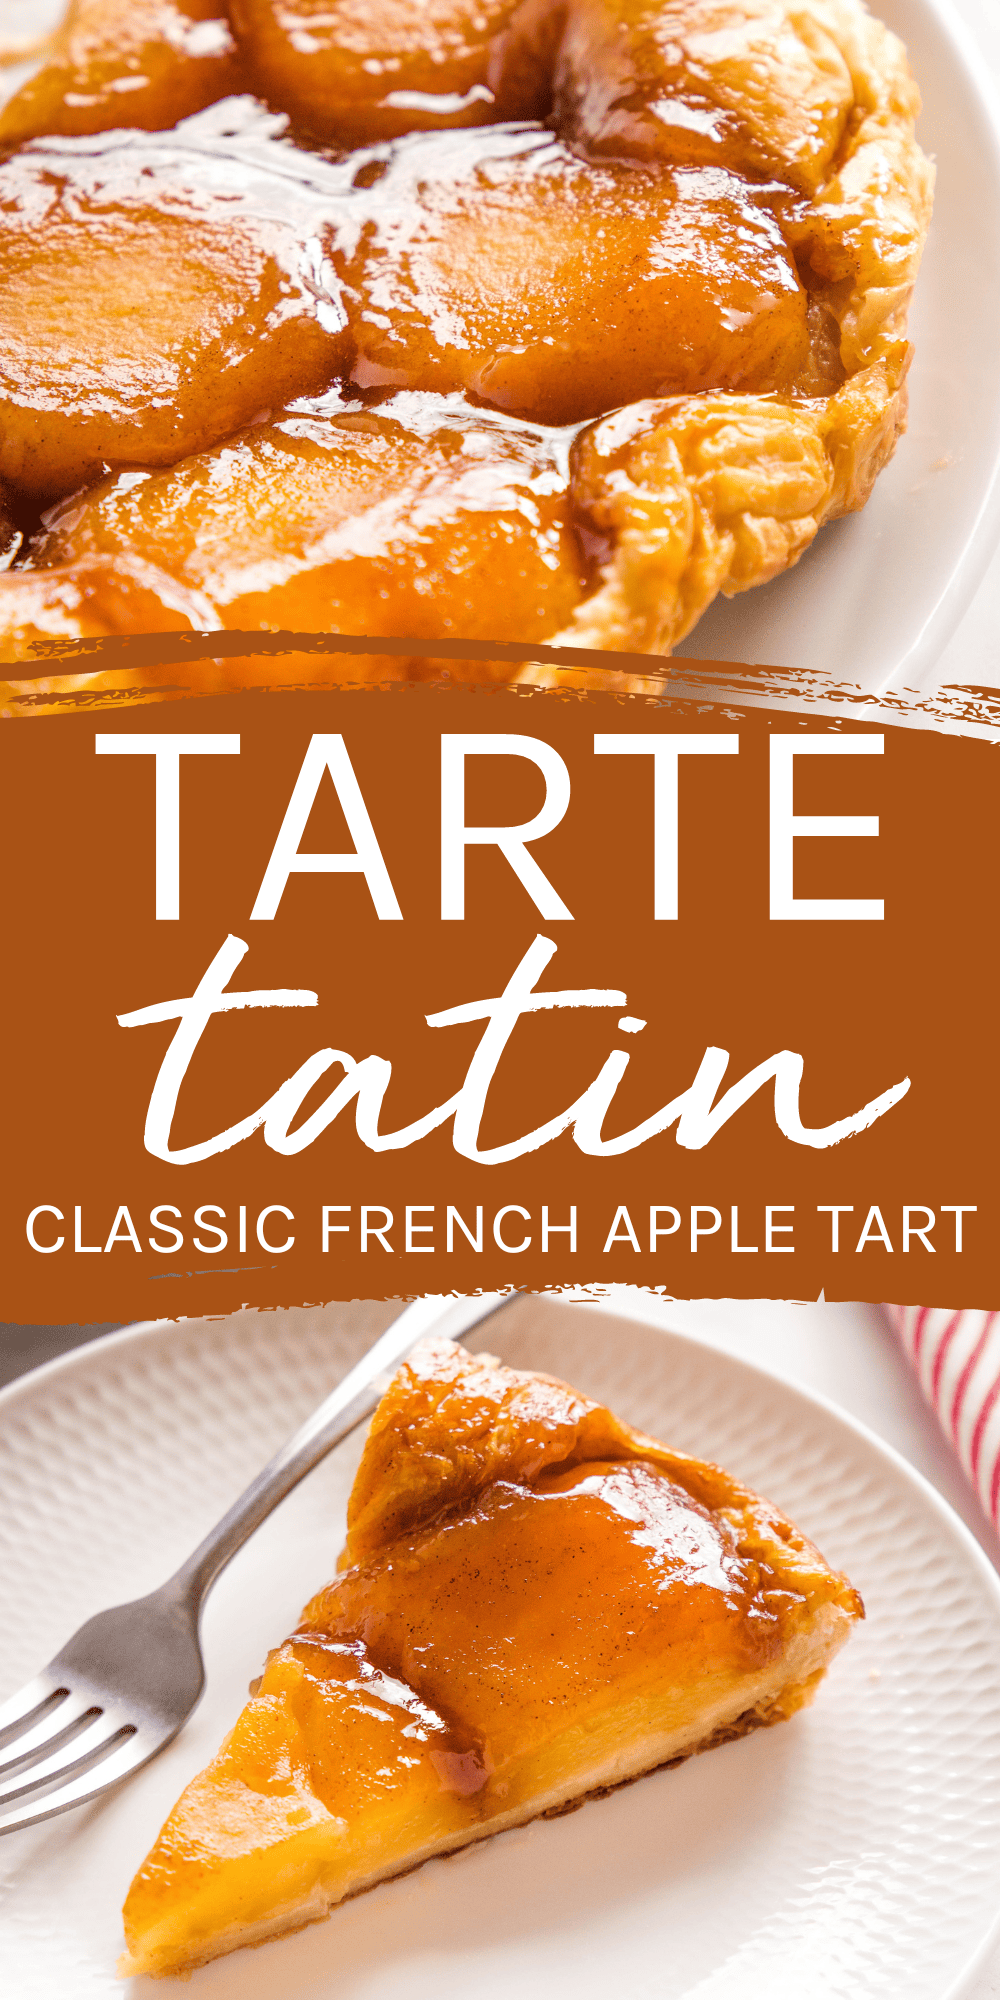 This Tarte Tatin recipe is the best classic French apple tart made simple - caramelized apples in a sweet & buttery caramel sauce with a flaky pastry crust! Enjoy a slice of France from the comfort of your own kitchen with this timeless and authentic recipe, including pro tips and tricks for the PERFECT homemade Tarte Tatin! Recipe from thebusybaker.ca! #tartetatin #appletart #frenchdessert #frenchappletart #besttartetatin #appletartetatin #parisdessert #parisrecipe #frenchrecipe #parisdessert via @busybakerblog